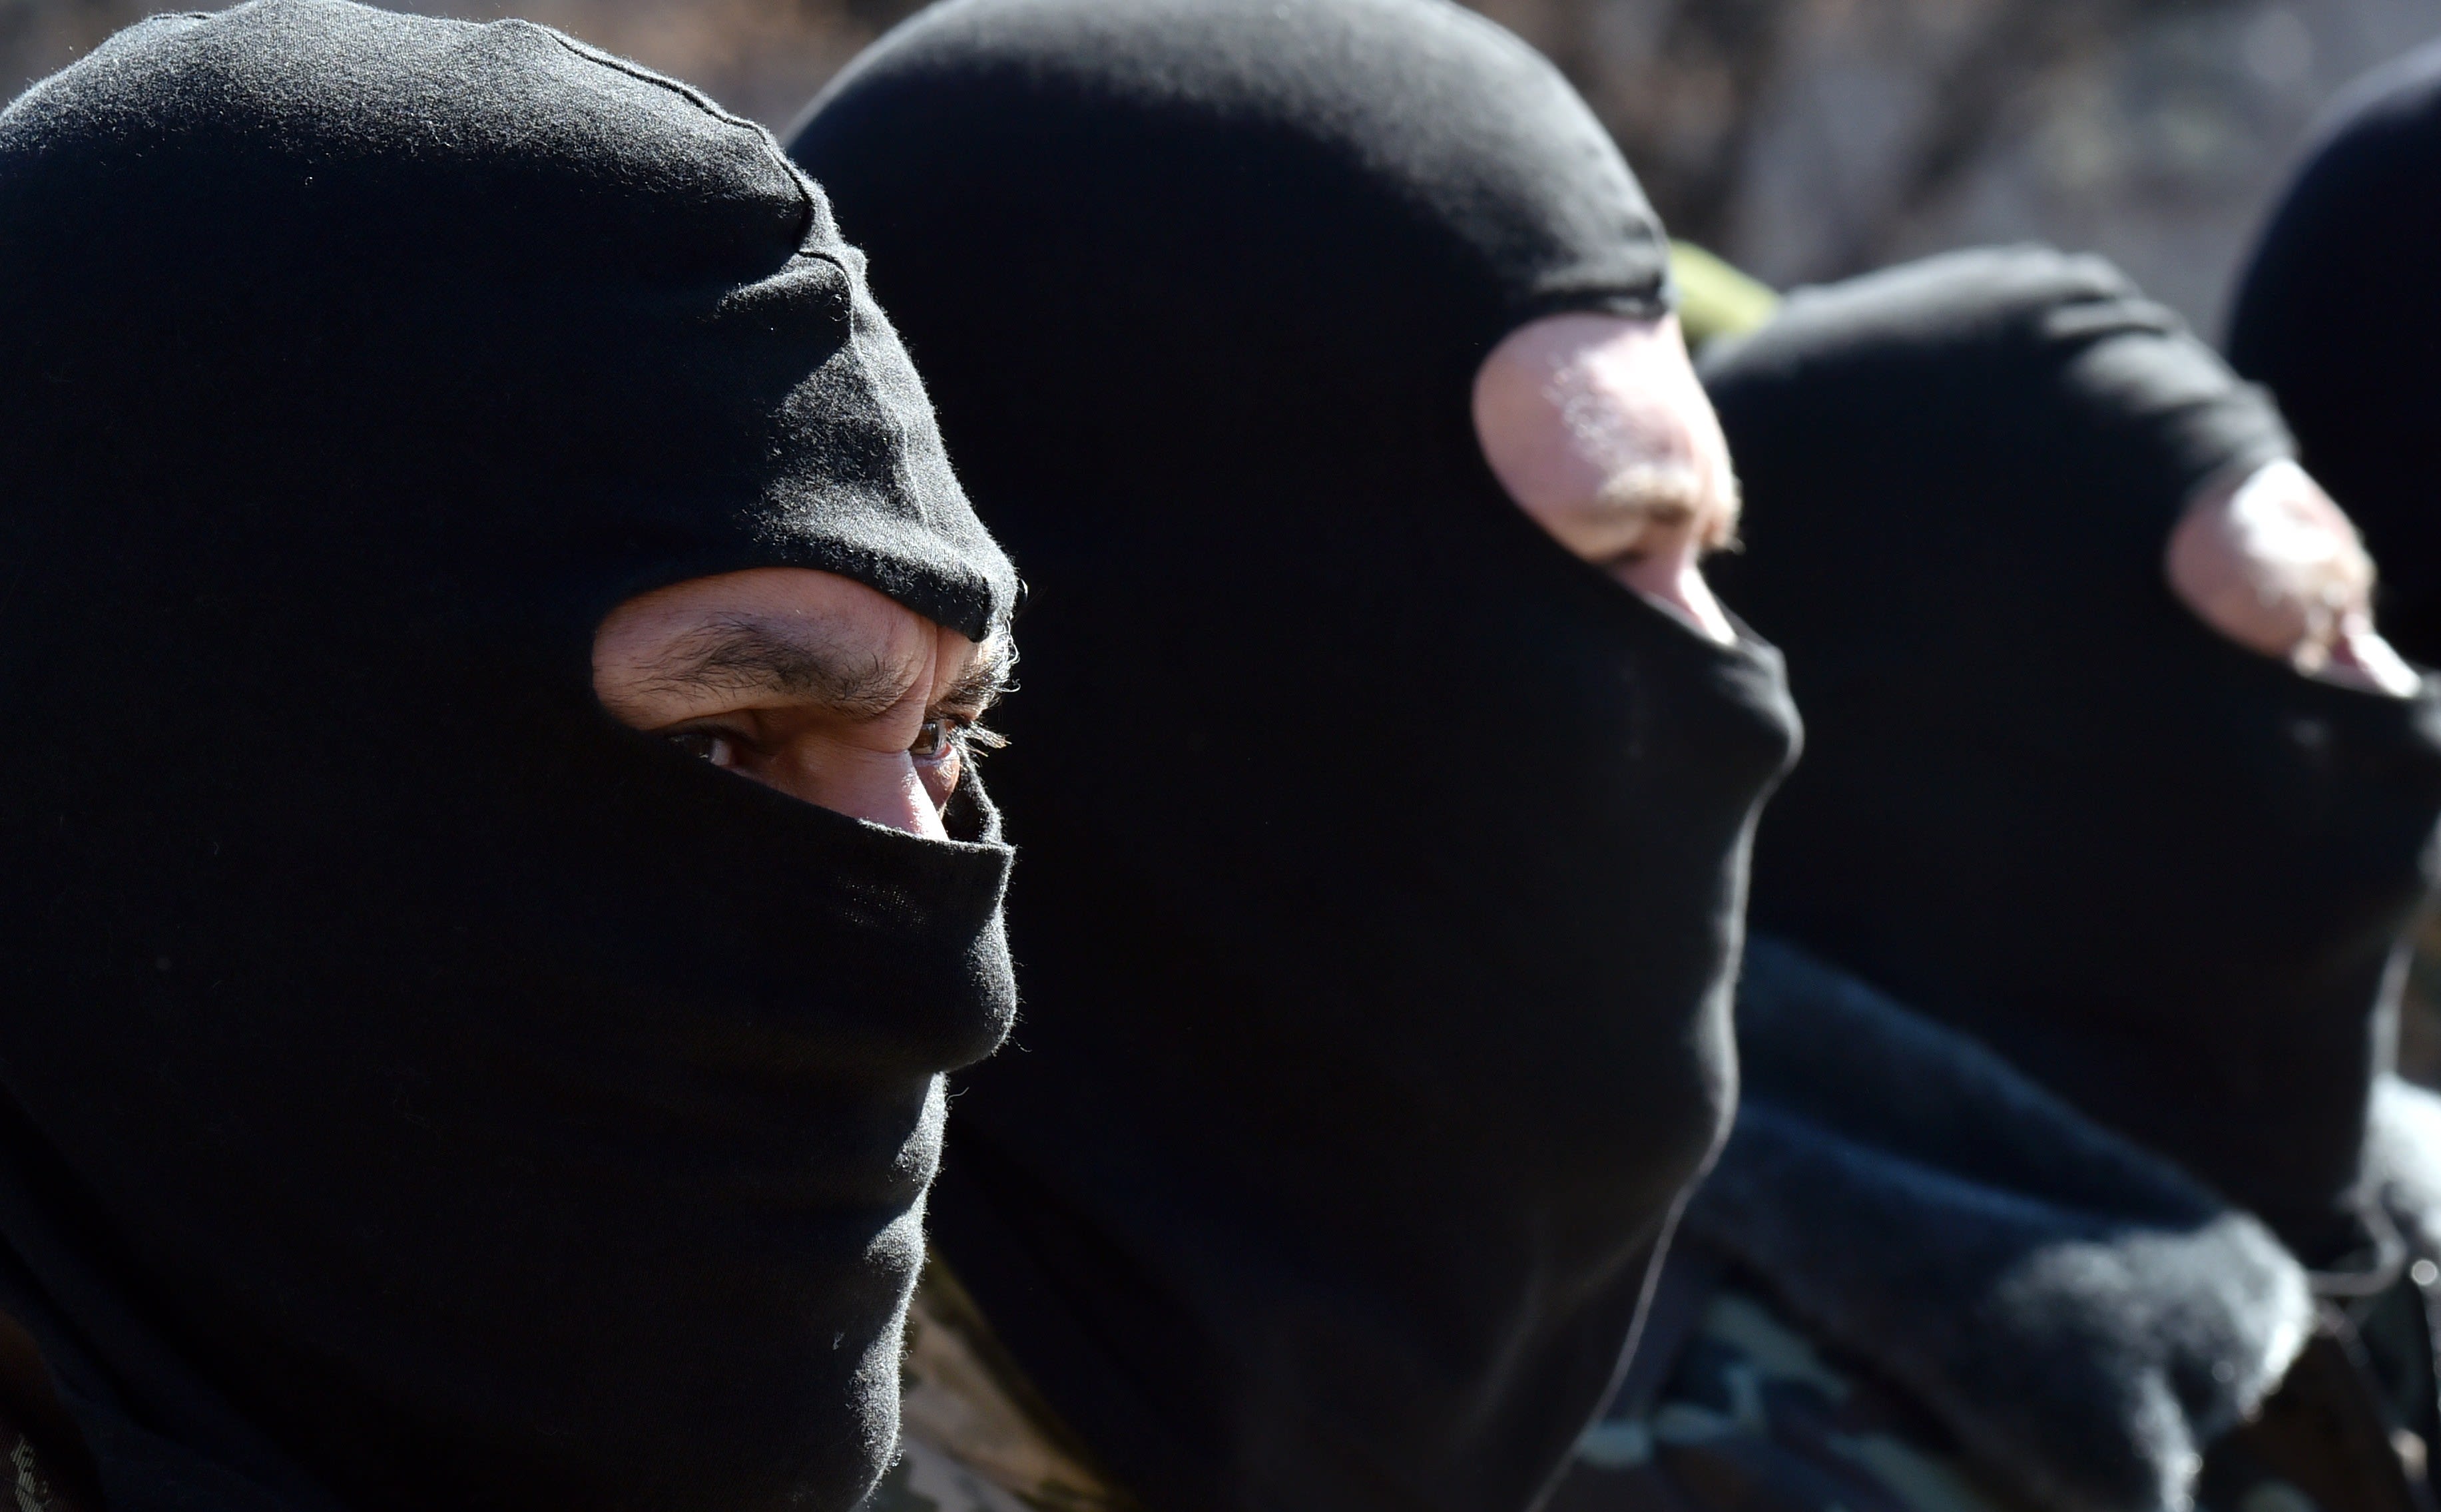 Why balaclavas have become a fashion trend during the pandemic